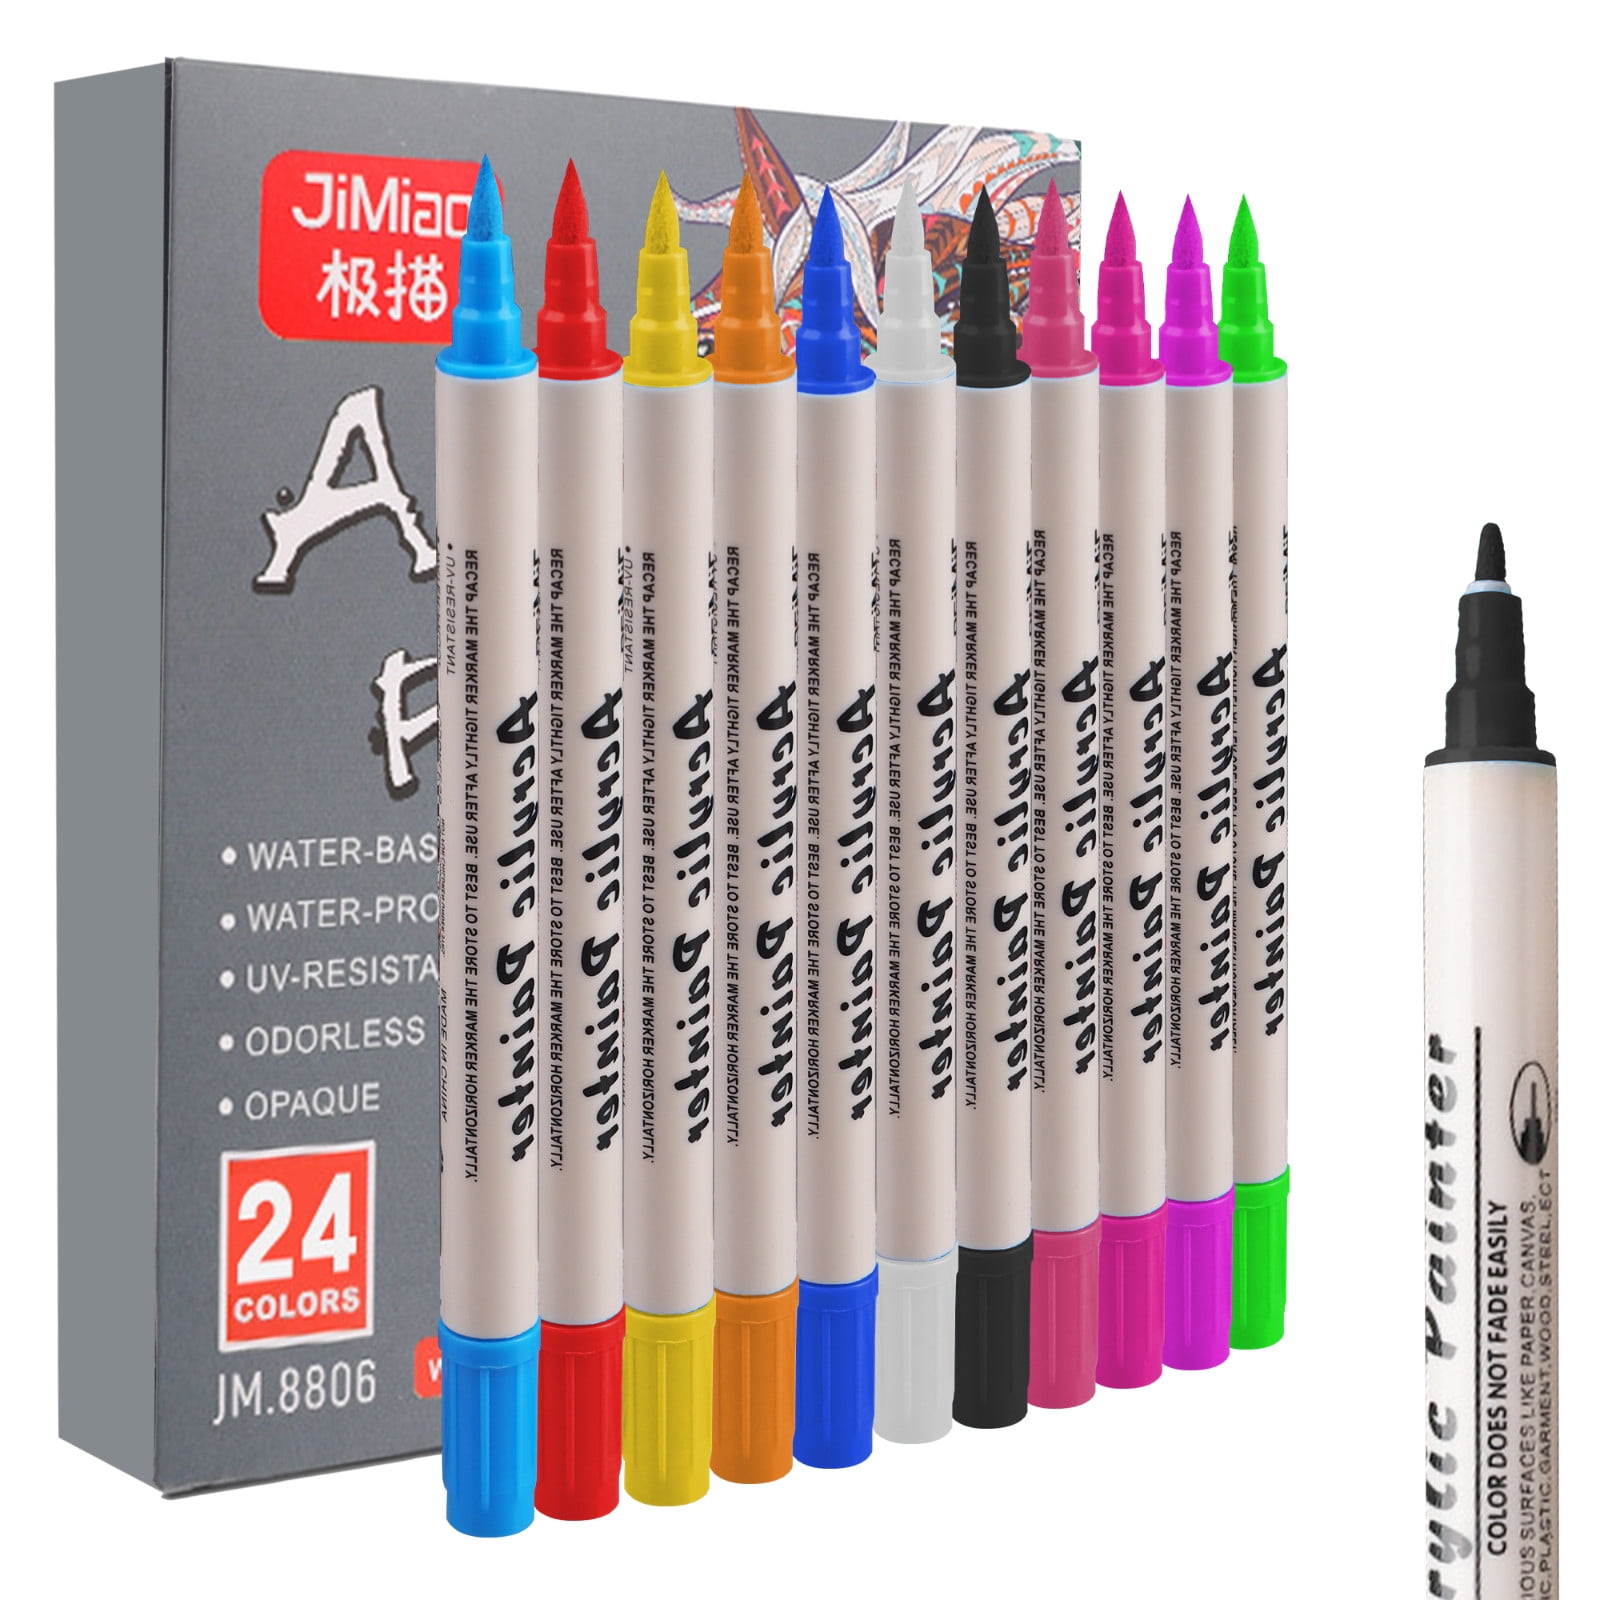 Acrylic Paint Pens Set, 12 Colors Acrylic Markers Kits for 2 to 3mm  Painting, Quick Dry Acrylic Paint Markers for Rock Painting Wood Fabric  Ceramic Porcelain Scrapbook, with Felt Pen Bag 